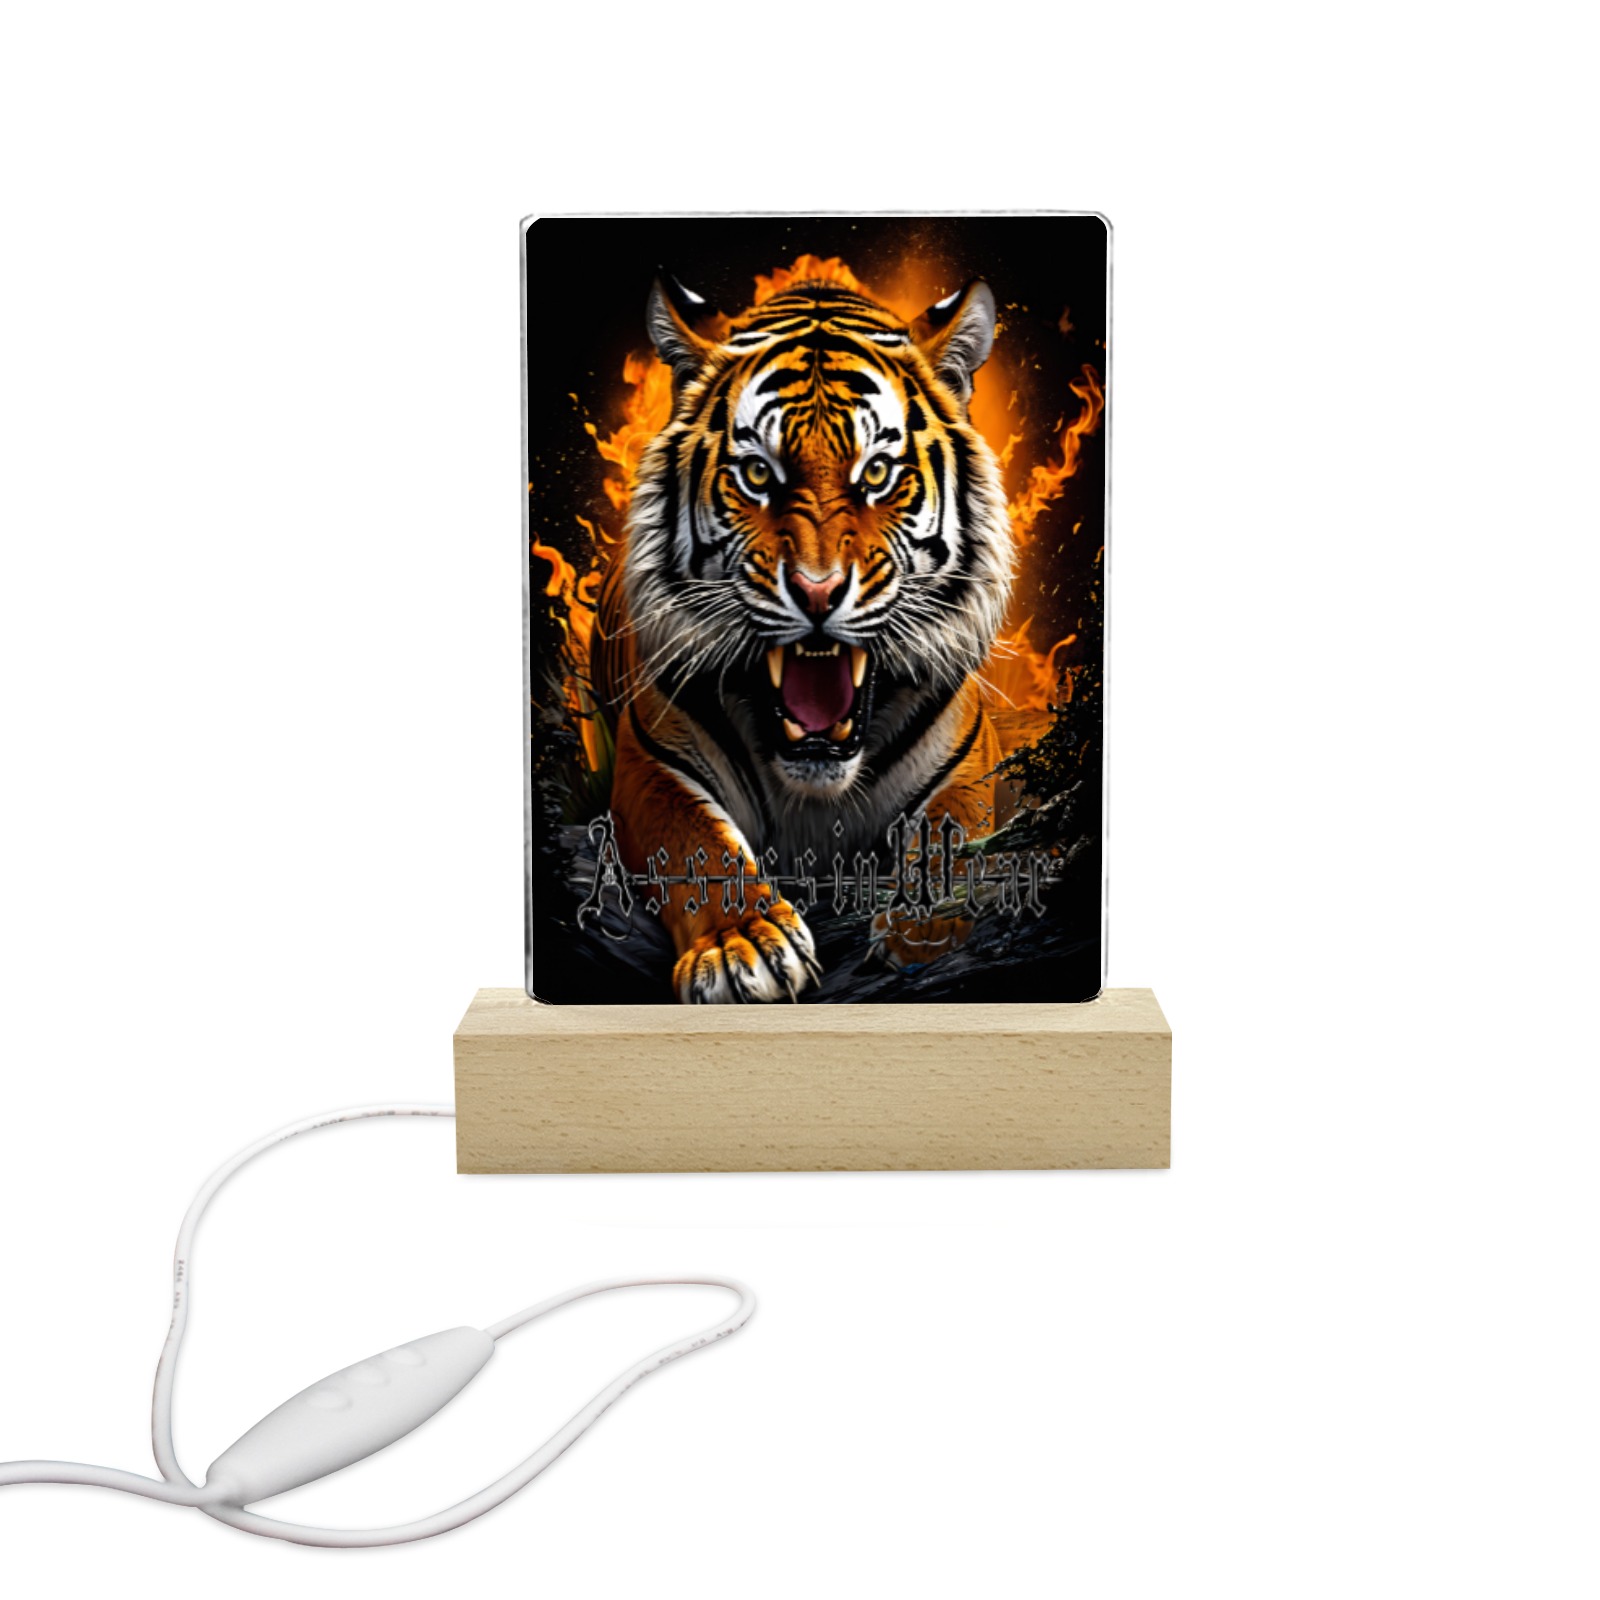 Fire Tiger 3535 RGB Lamp Acrylic Photo Print with Colorful Light Square Base 5"x7.5"